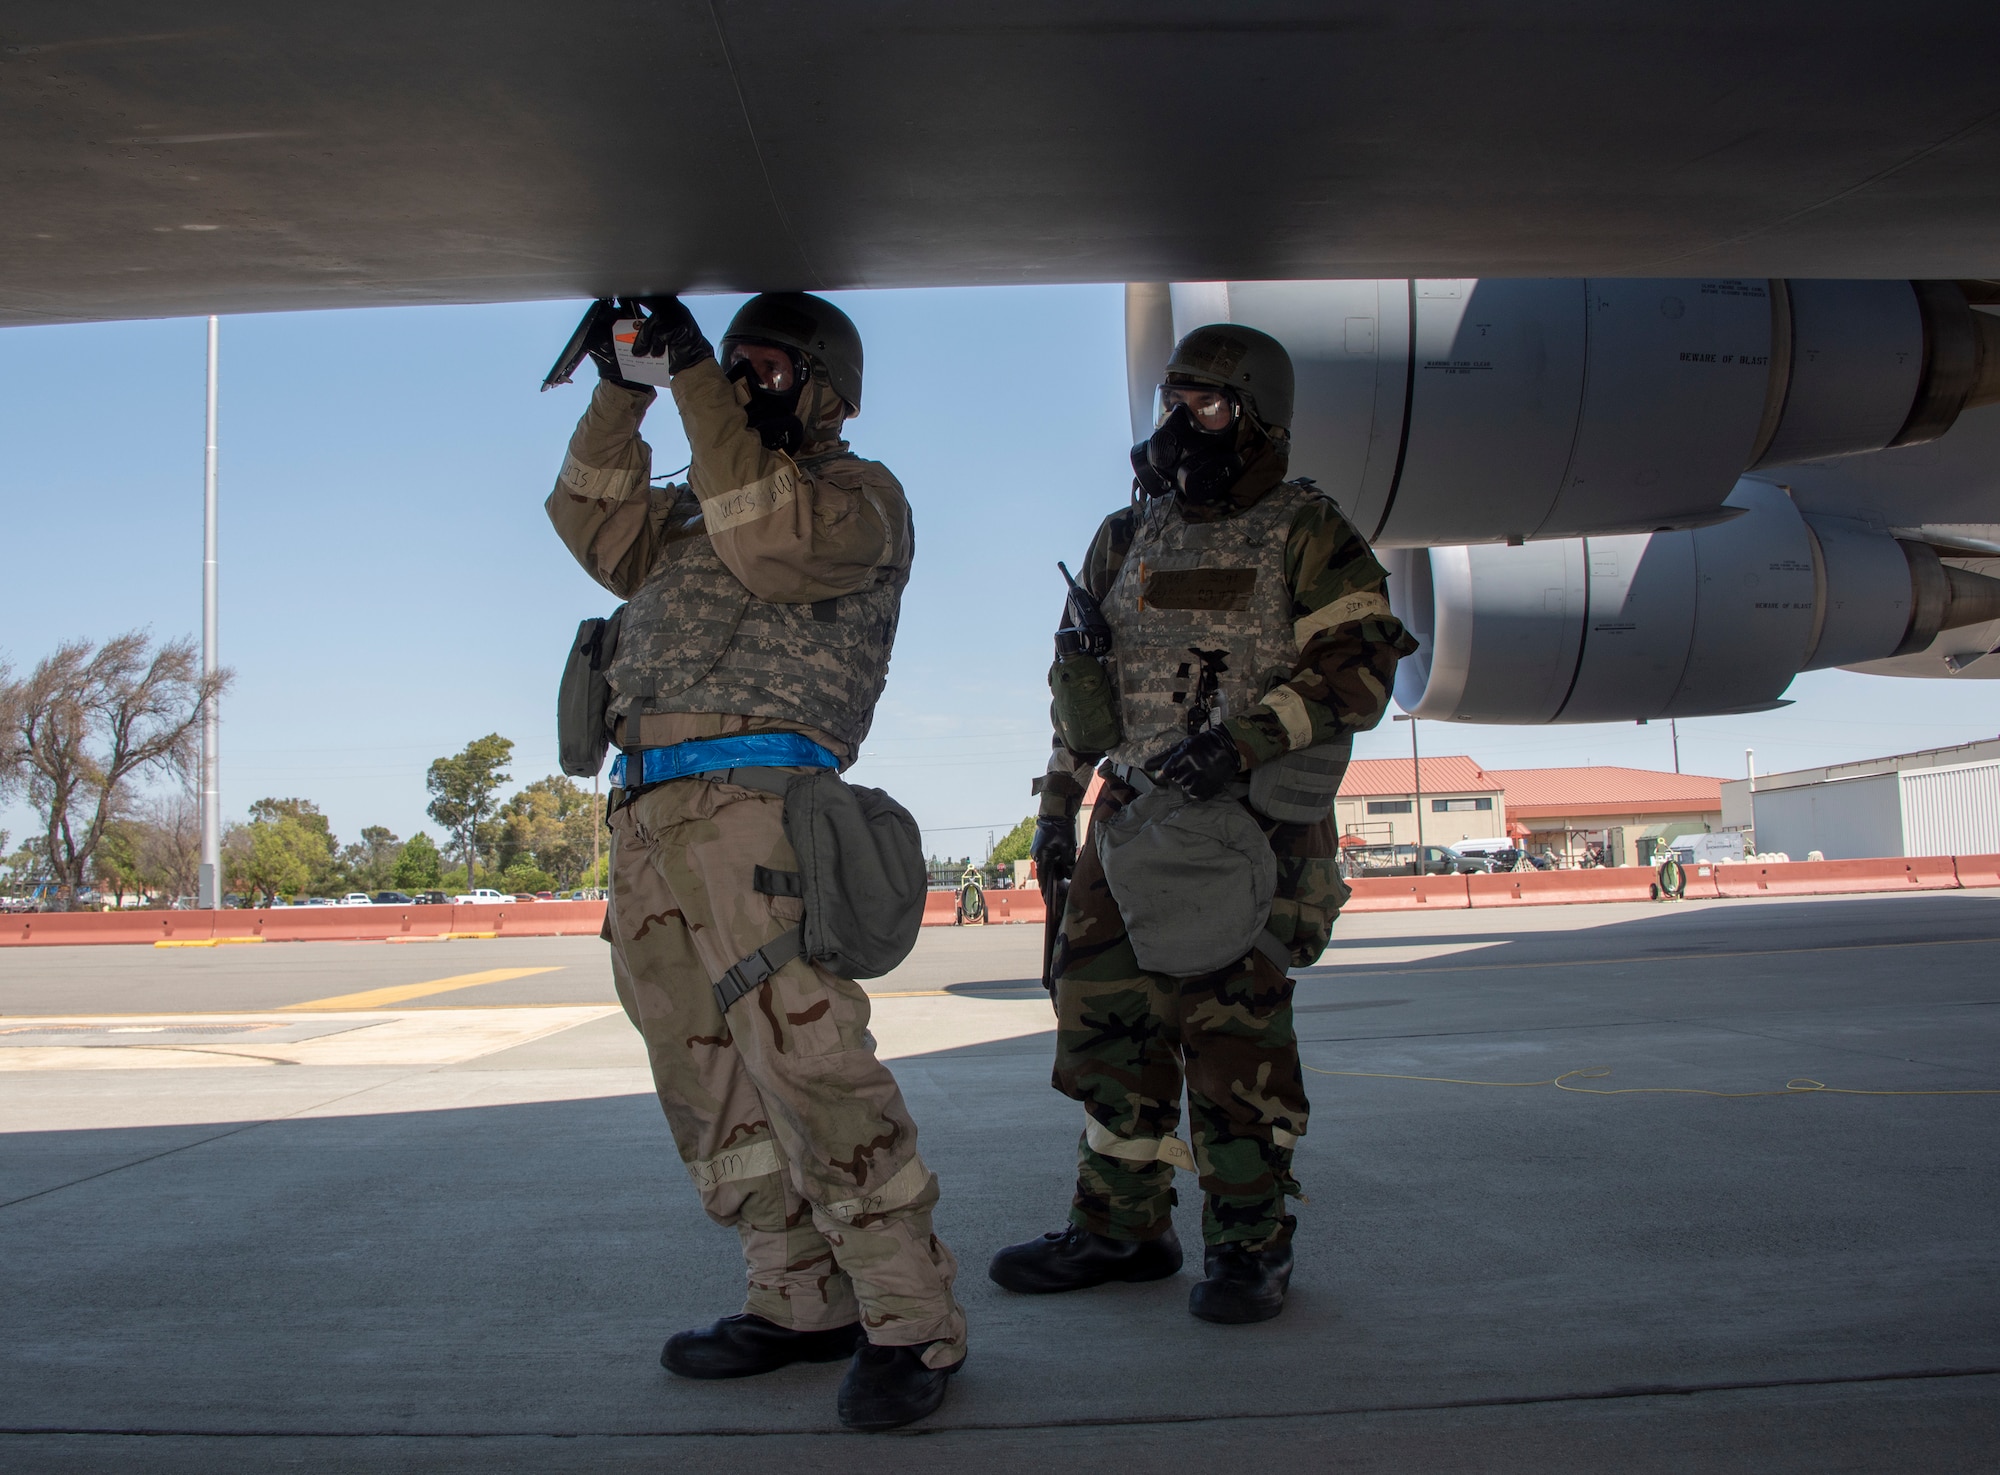 U.S. Air Force Staff Sgt. Corey Fugate, left, and SSgt. Christopher Renteria, right, both with the 349th Aircraft Maintenance Squadron, preform liquid oxygen service on a C-5M Super Galaxy during a readiness exercise at Travis Air Force Base, California, May 9, 2019. The base conducted a week-long exercise that evaluated Travis’ readiness and ability to execute and sustain rapid global mobility around the world. (U.S. Air Force photo by Heide Couch)